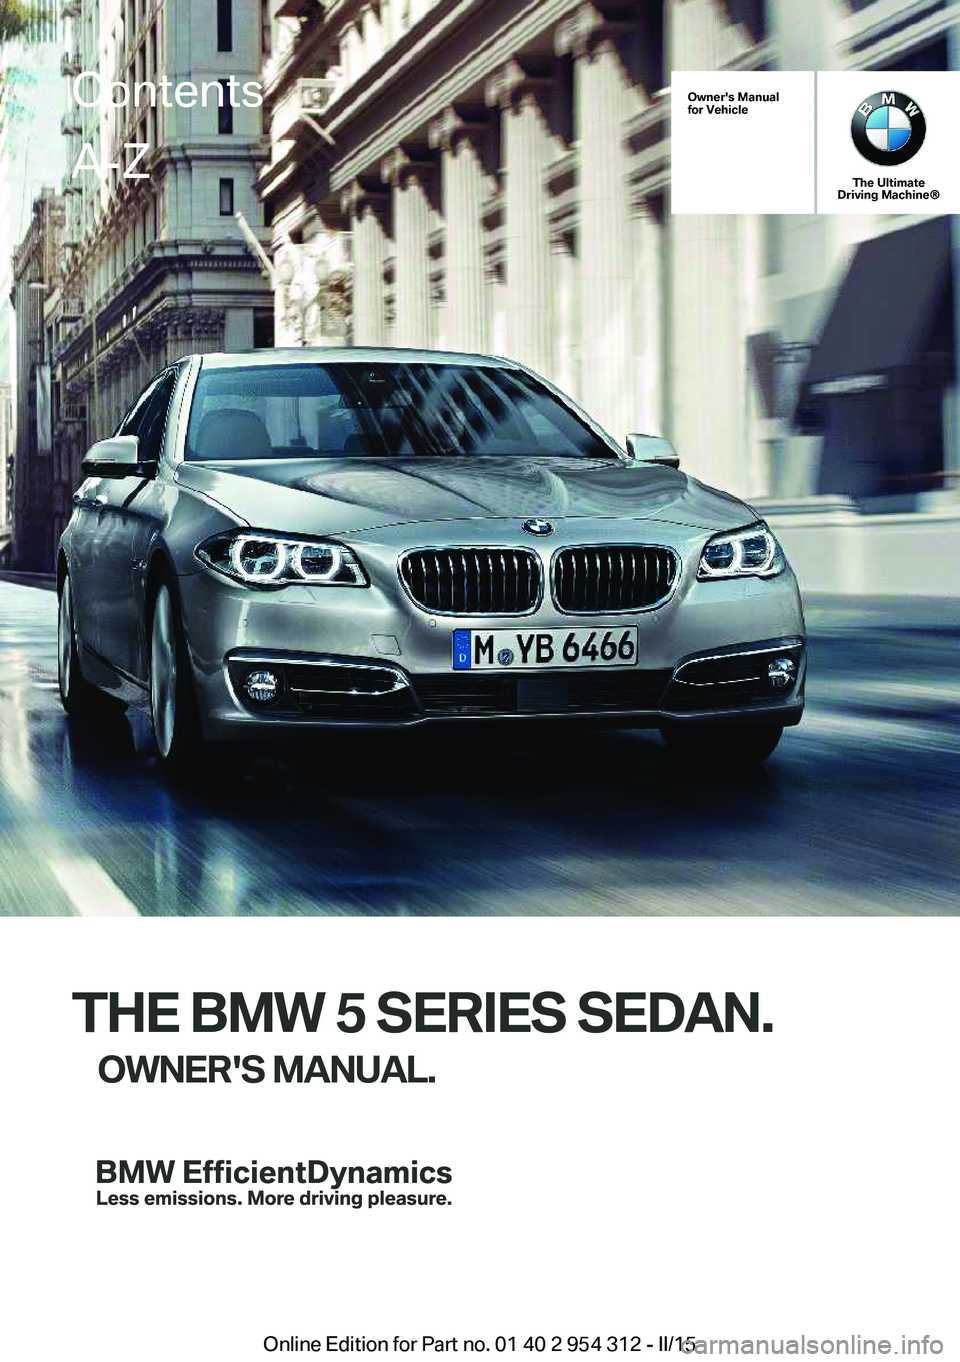 BMW 535D SEDAN 2016  Owners Manual Owner's Manual
for Vehicle
The Ultimate
Driving Machine®
THE BMW 5 SERIES SEDAN.
OWNER'S MANUAL.
ContentsA-Z
Online Edition for Part no. 01 40 2 954 312 - II/15   